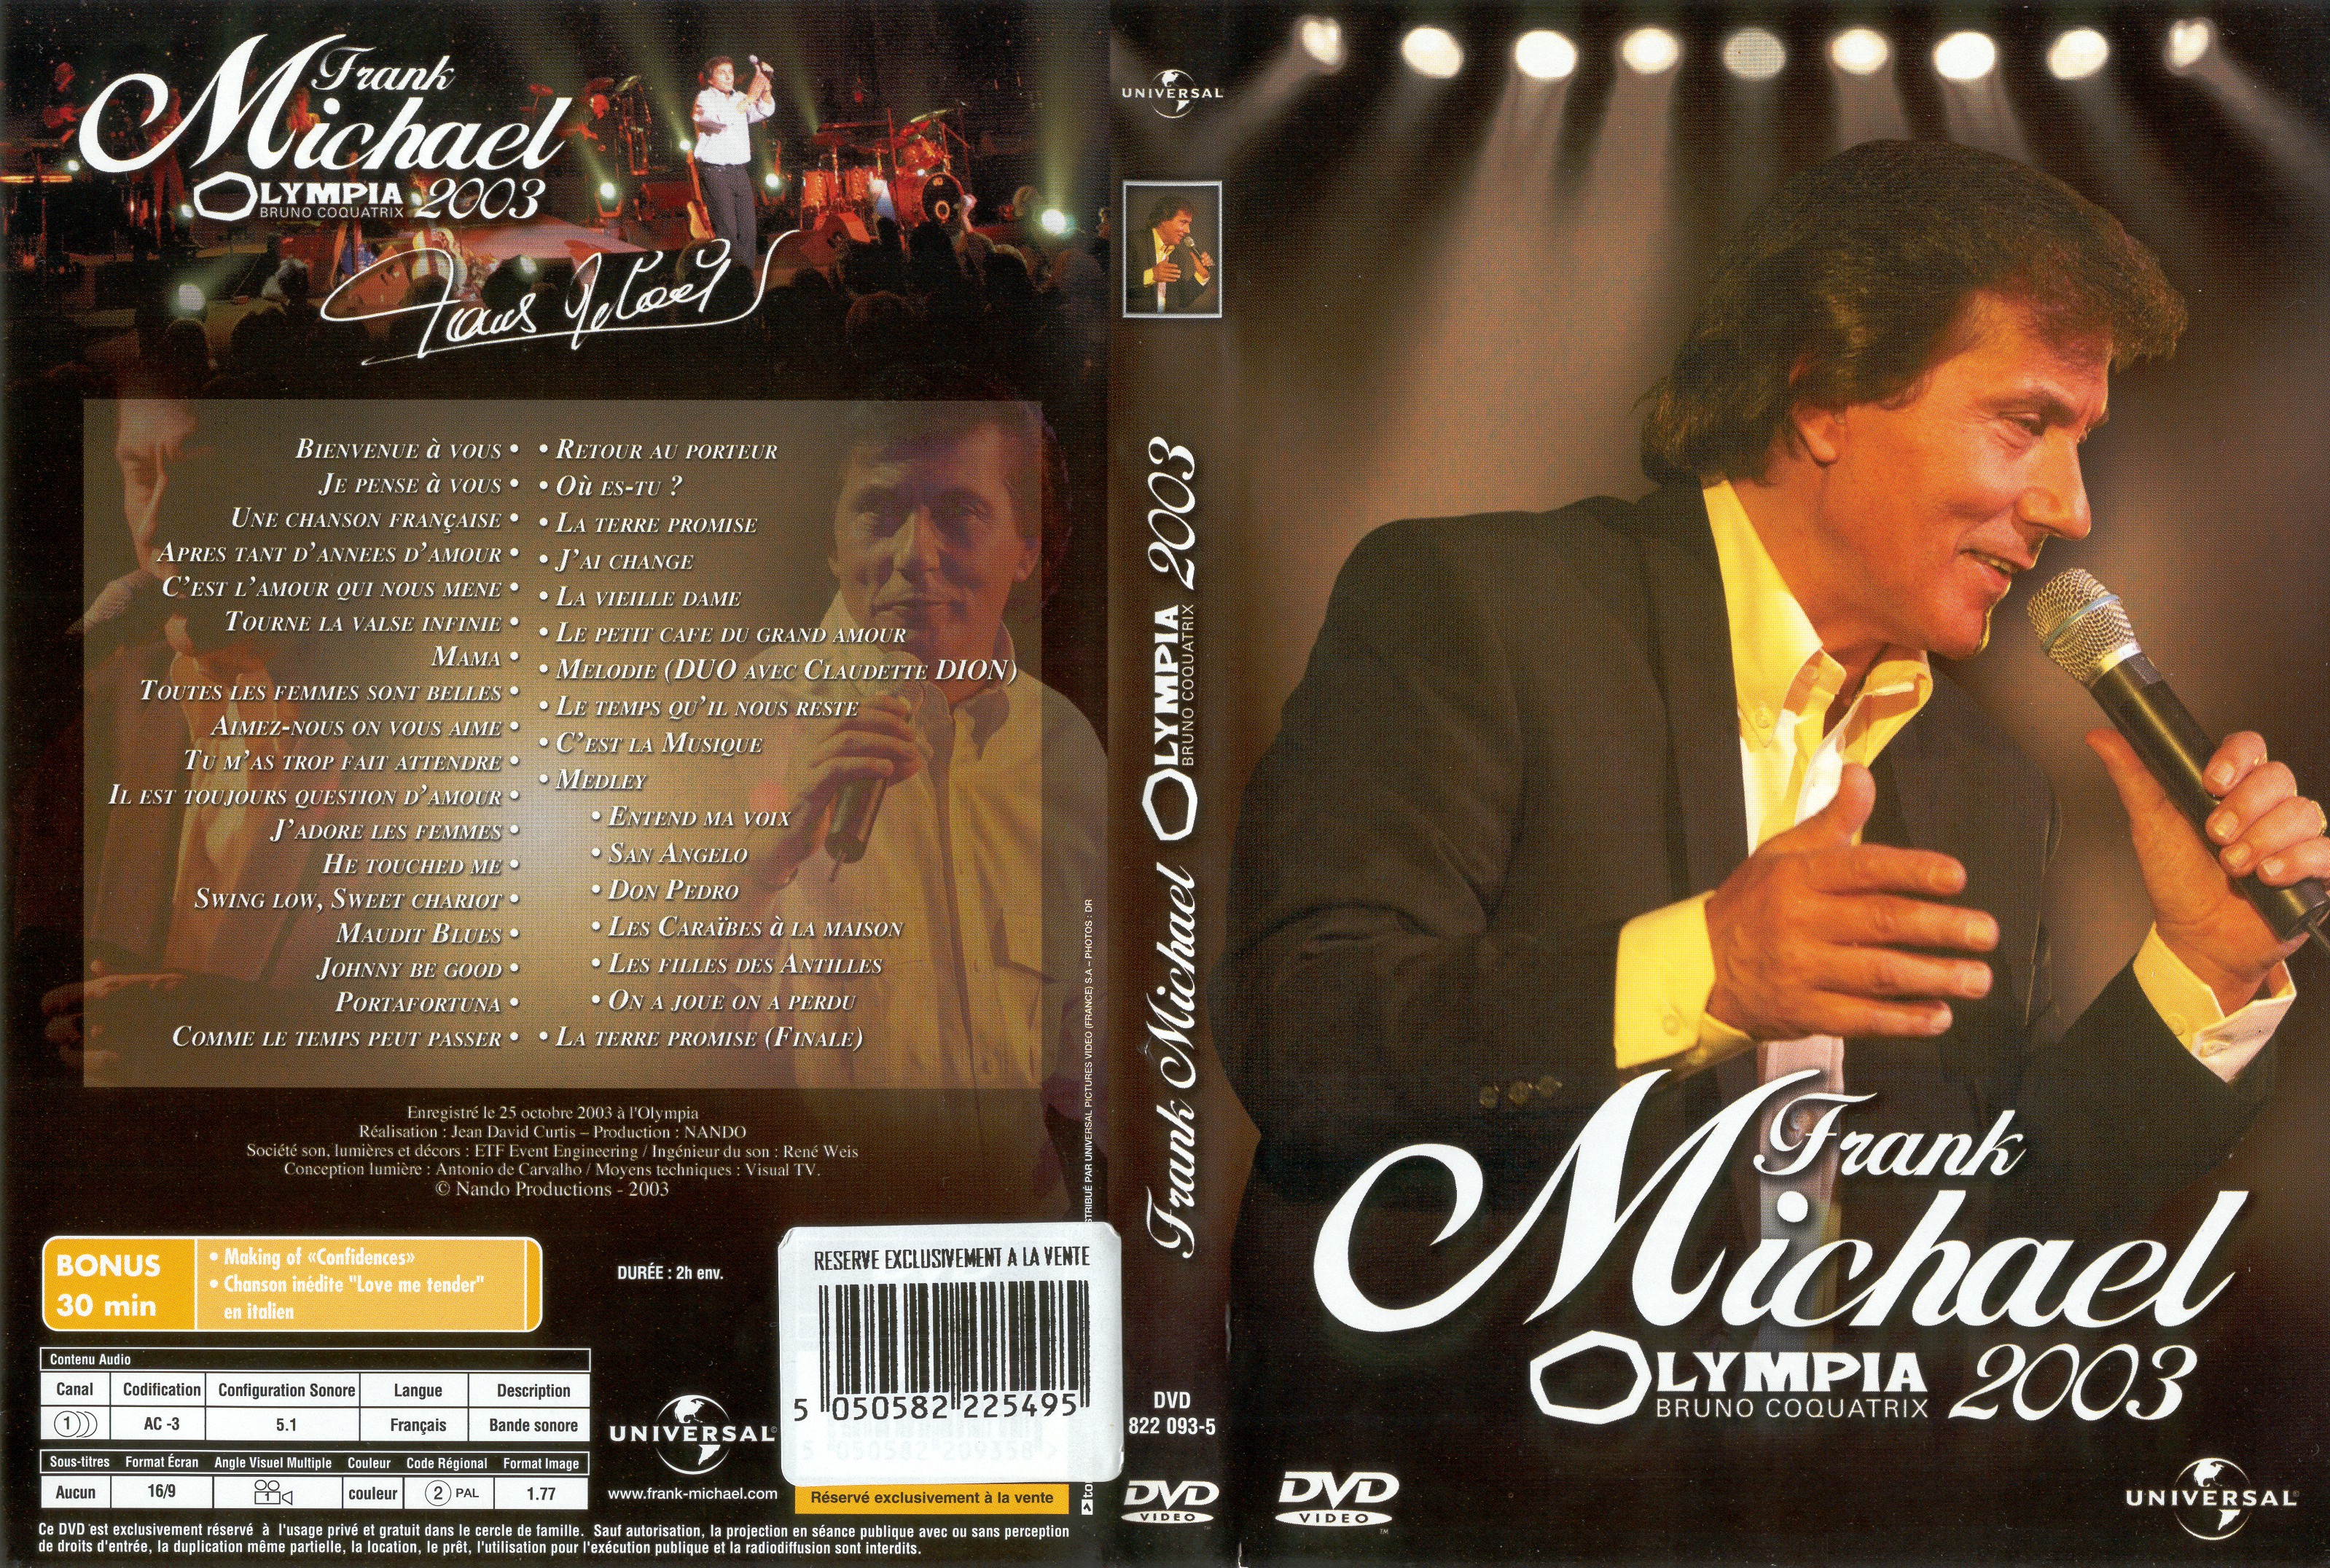 Jaquette DVD Frank Michael Olympia 2003